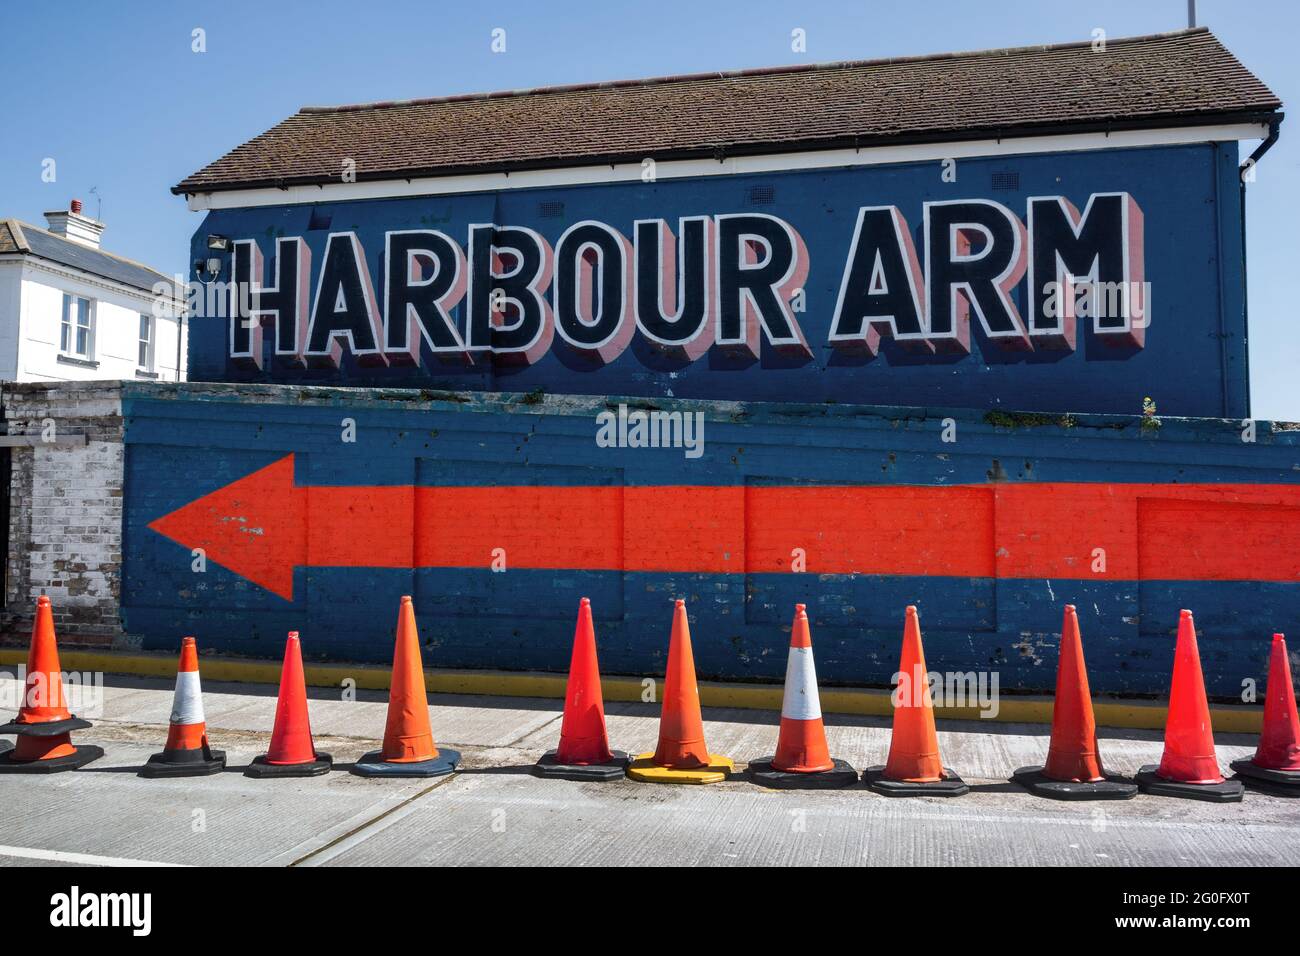 Harbour Arm sign showing a big orange arrow on a bright blue wall, Folkestone Harbour Stock Photo